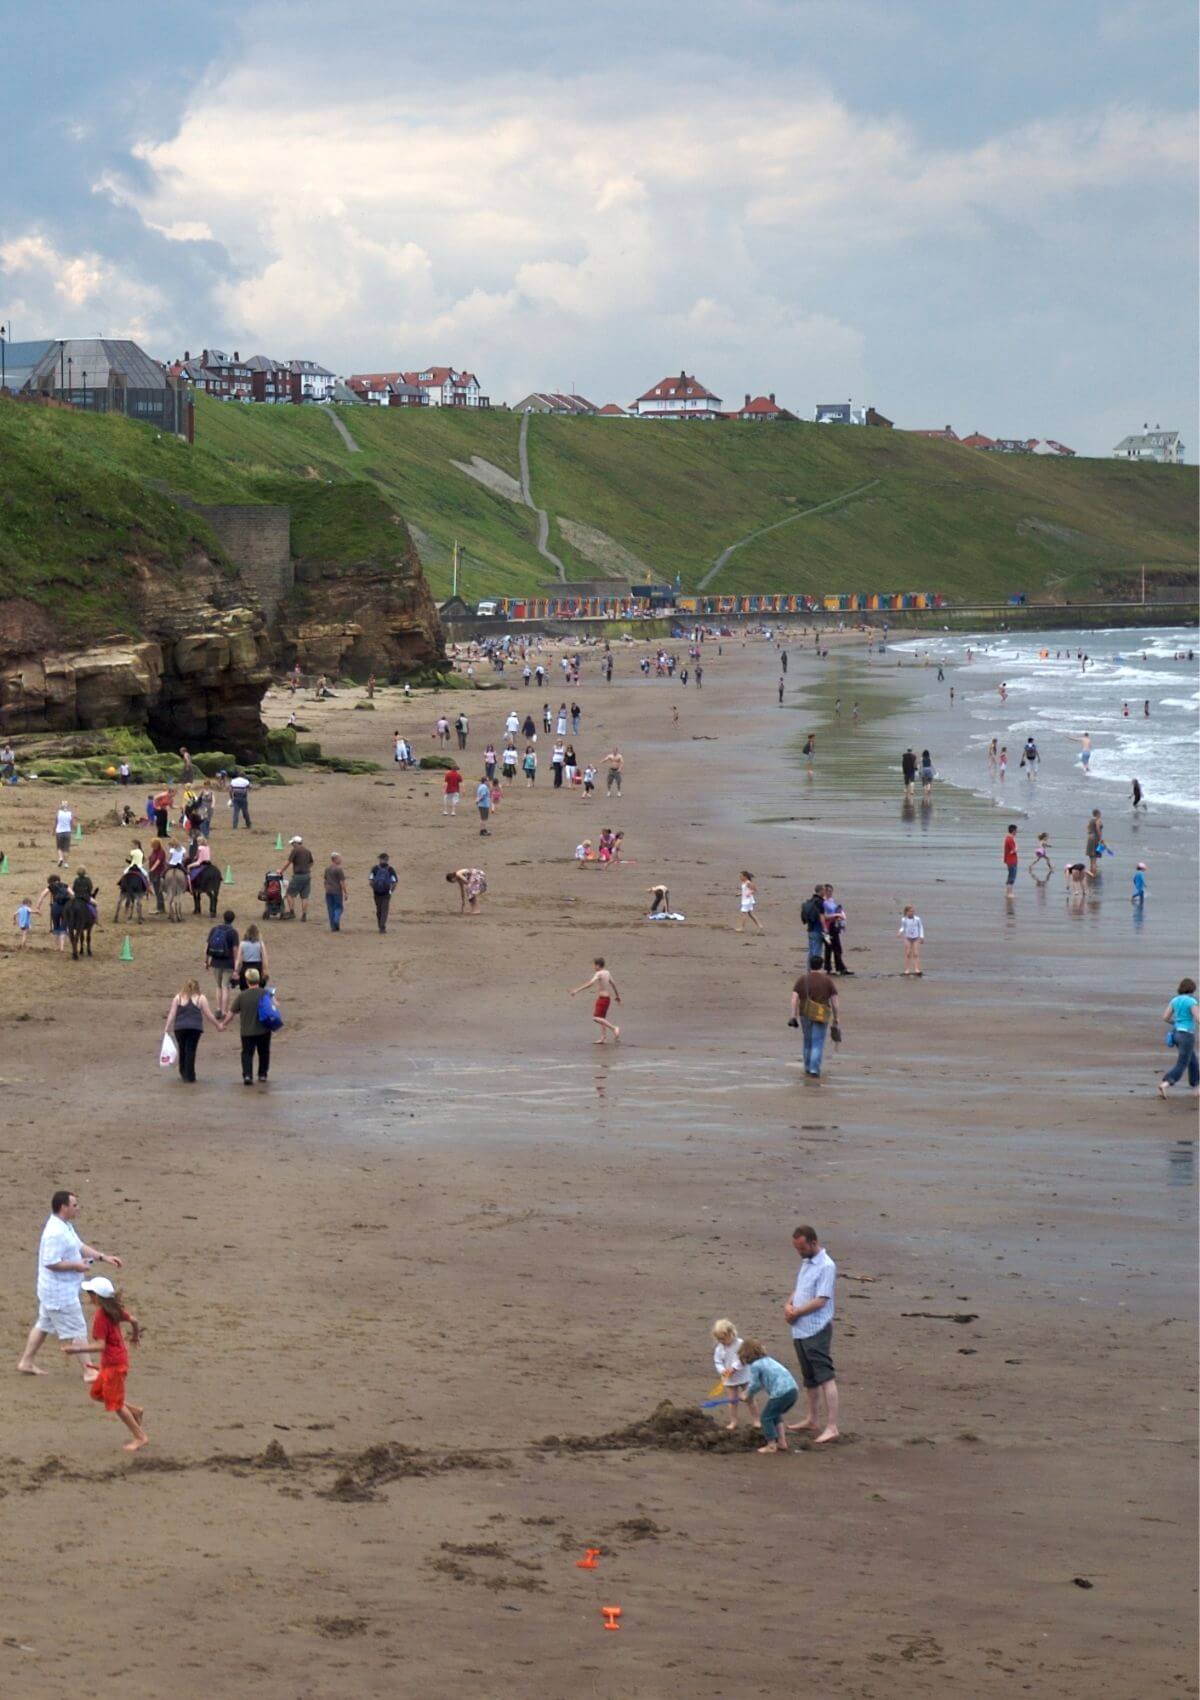 Whitby Beach in Yorkshire